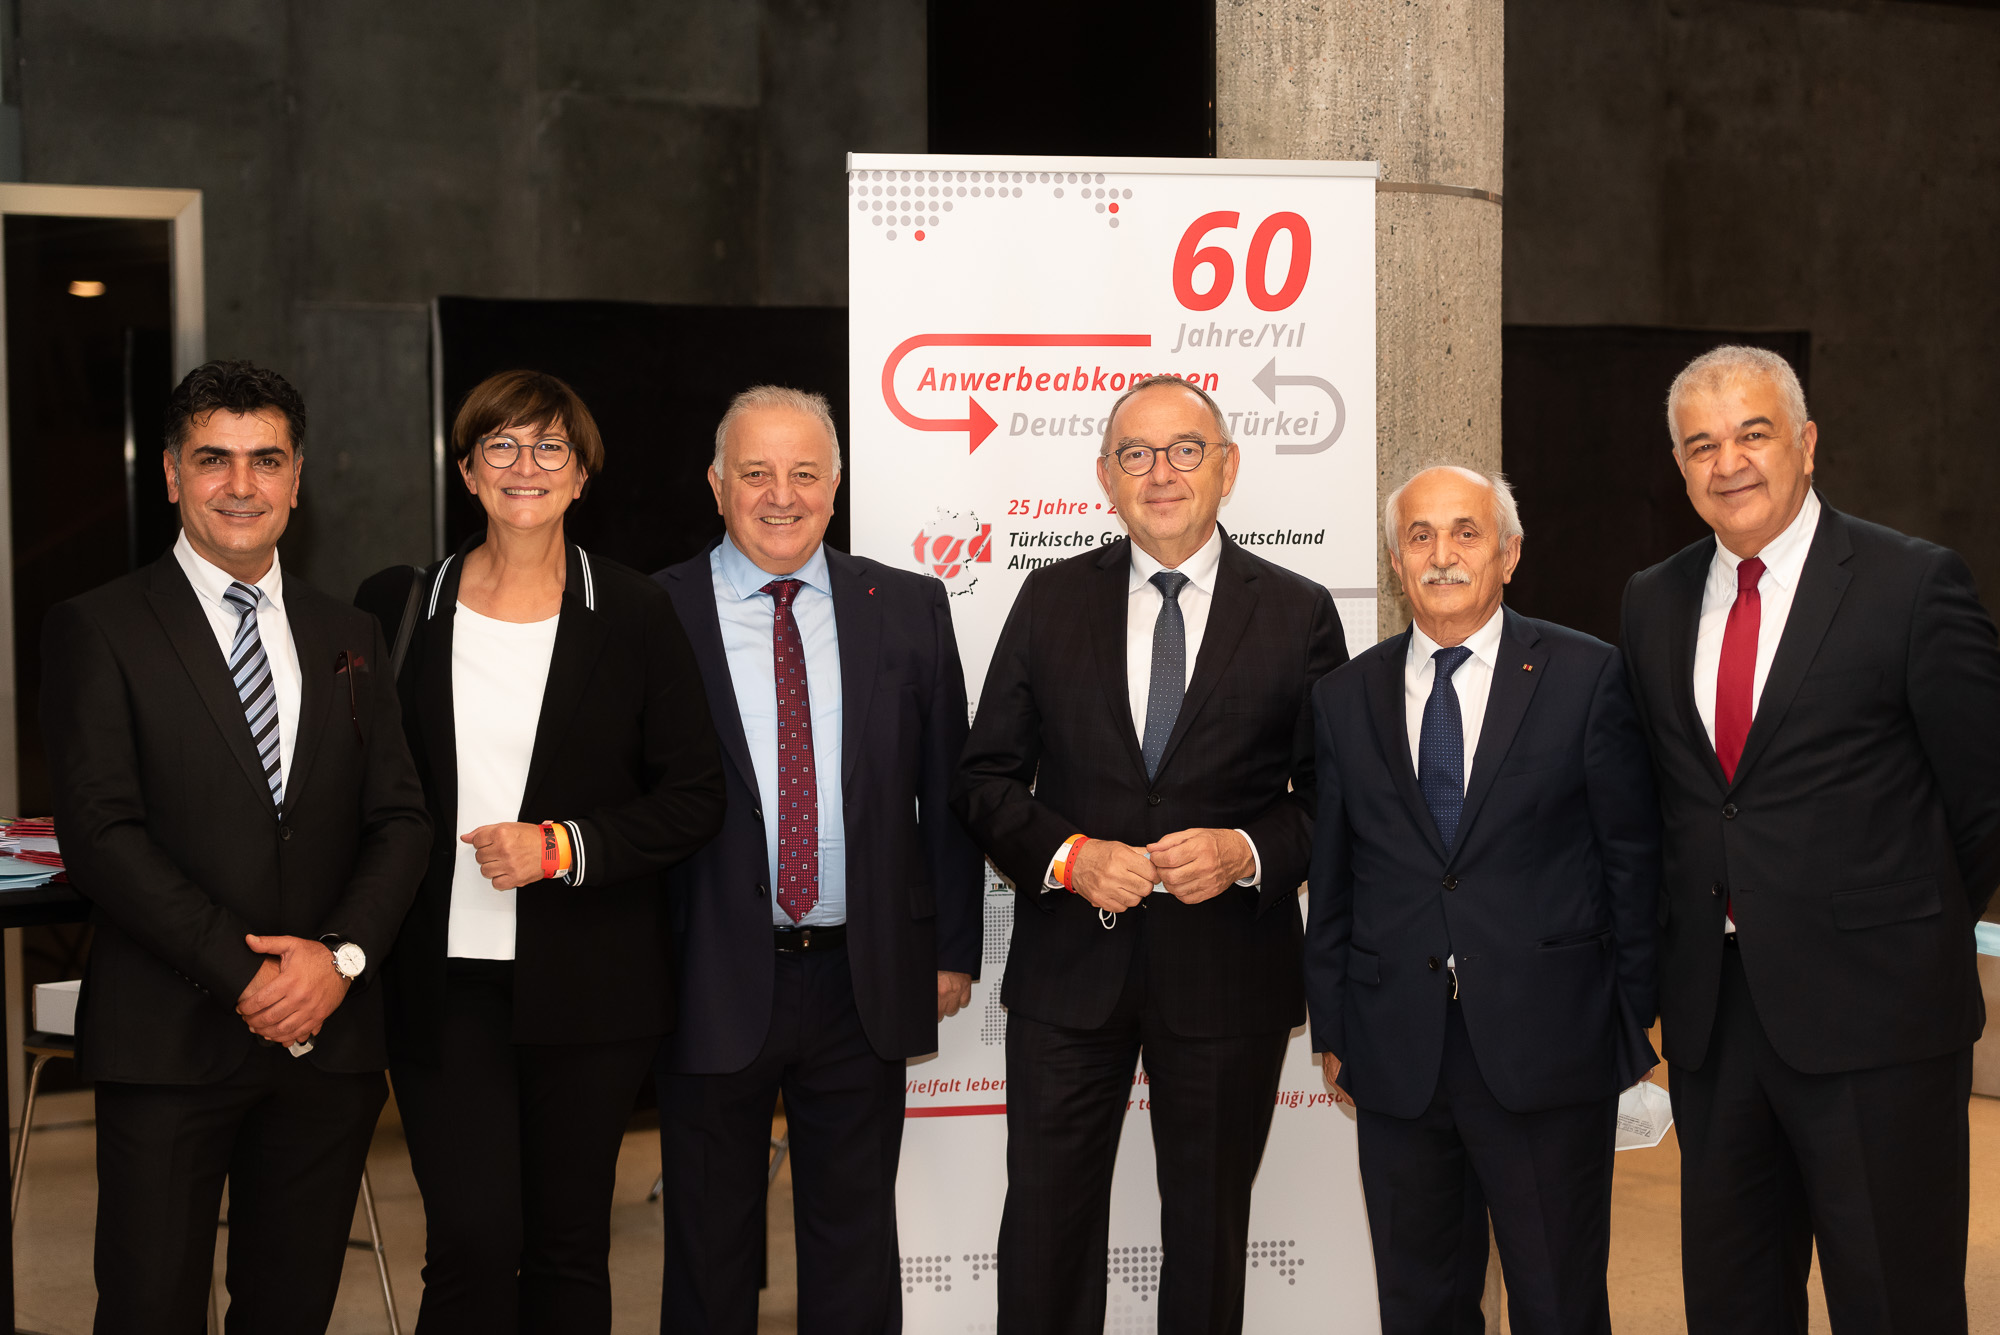 The TGD also celebrated the association's 25th anniversary that evening and received a visit from SPD chairwomen Saskia Esken and Norbert-Walter Borjans. Photo: Andreas Schwarz